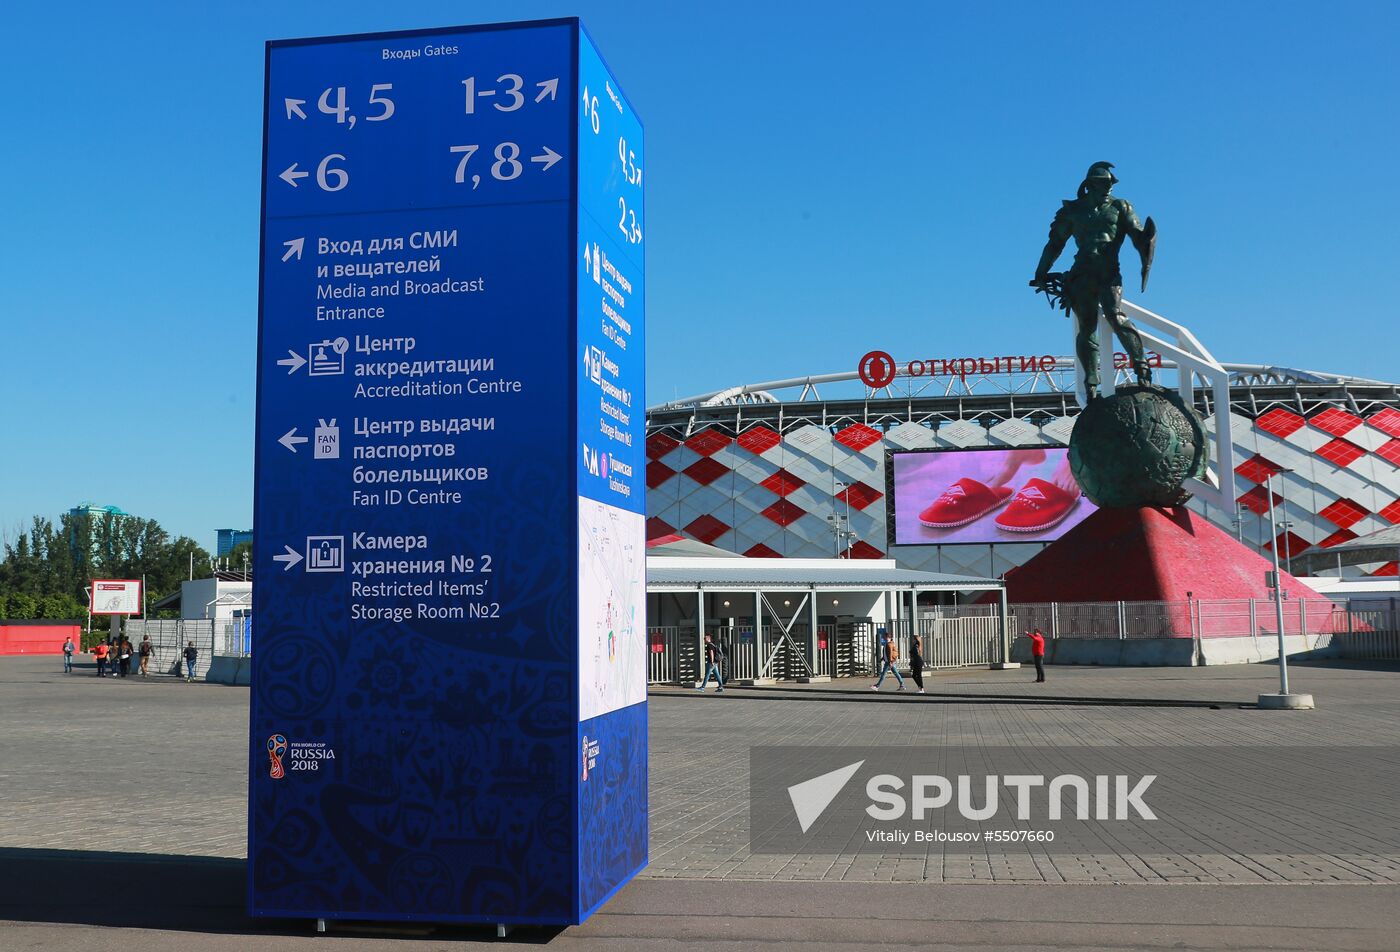 Information dashboards set up in Moscow for FIFA World Cup